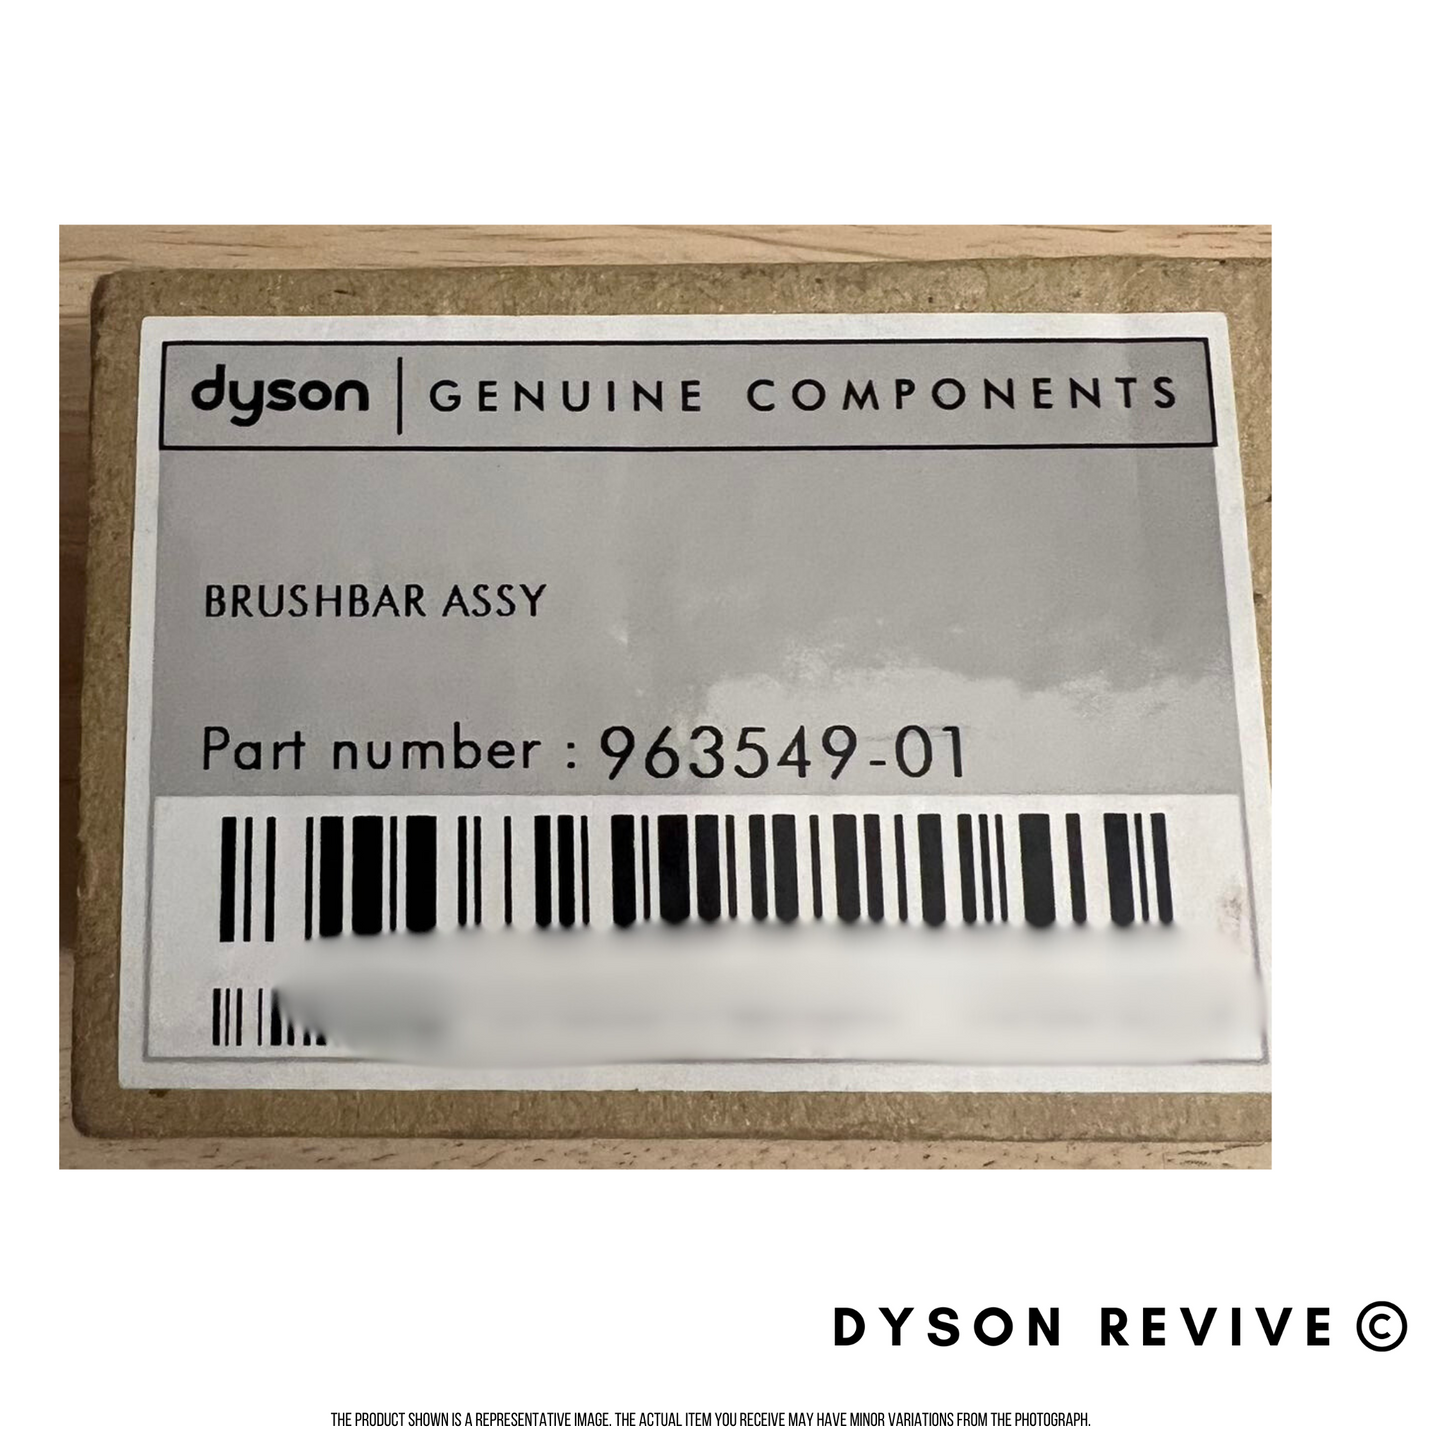 Genuine Dyson Brushbar Assembly 963549-01 Fits: DC28c, DC37c, DC52, DC53, DC54, and DC78